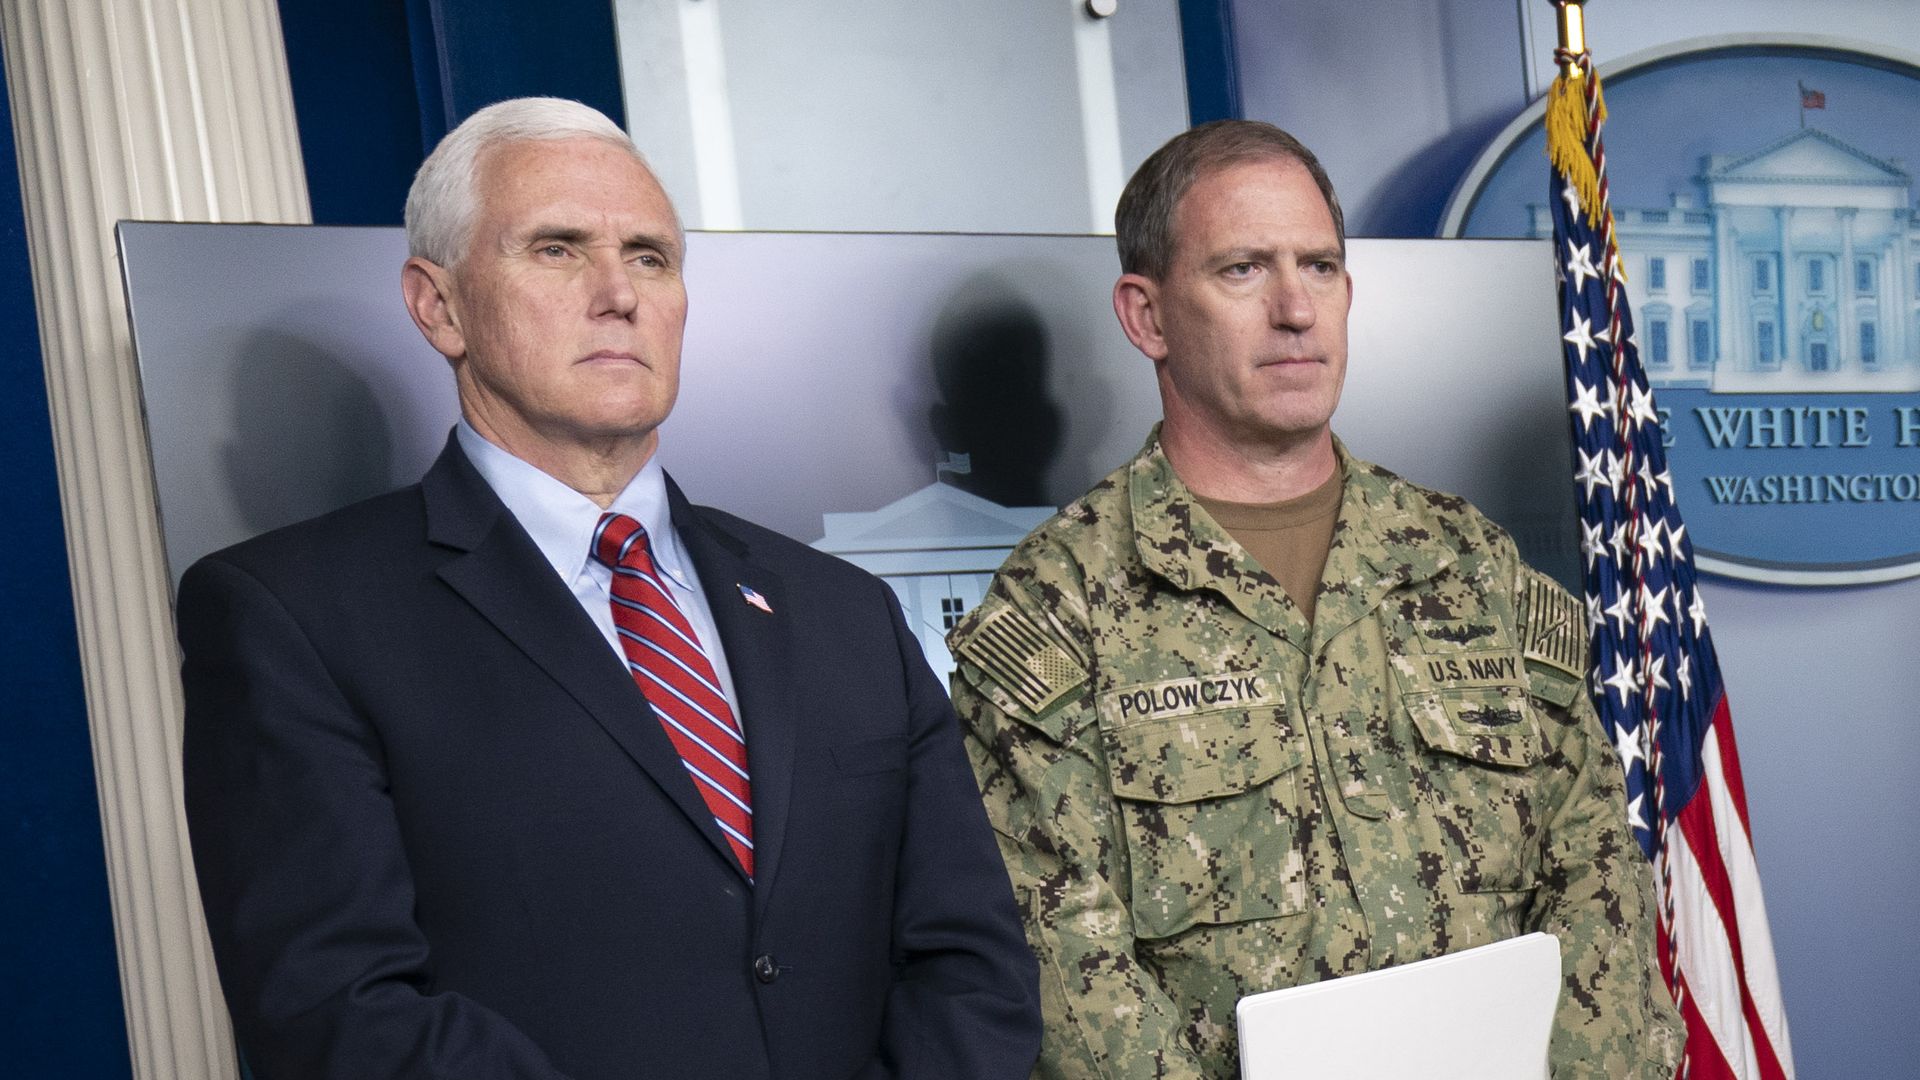 Pence and supply chain task force lead Navy Rear Adm. John Polowczyk. Photo: Sarah Silbiger/Getty Images